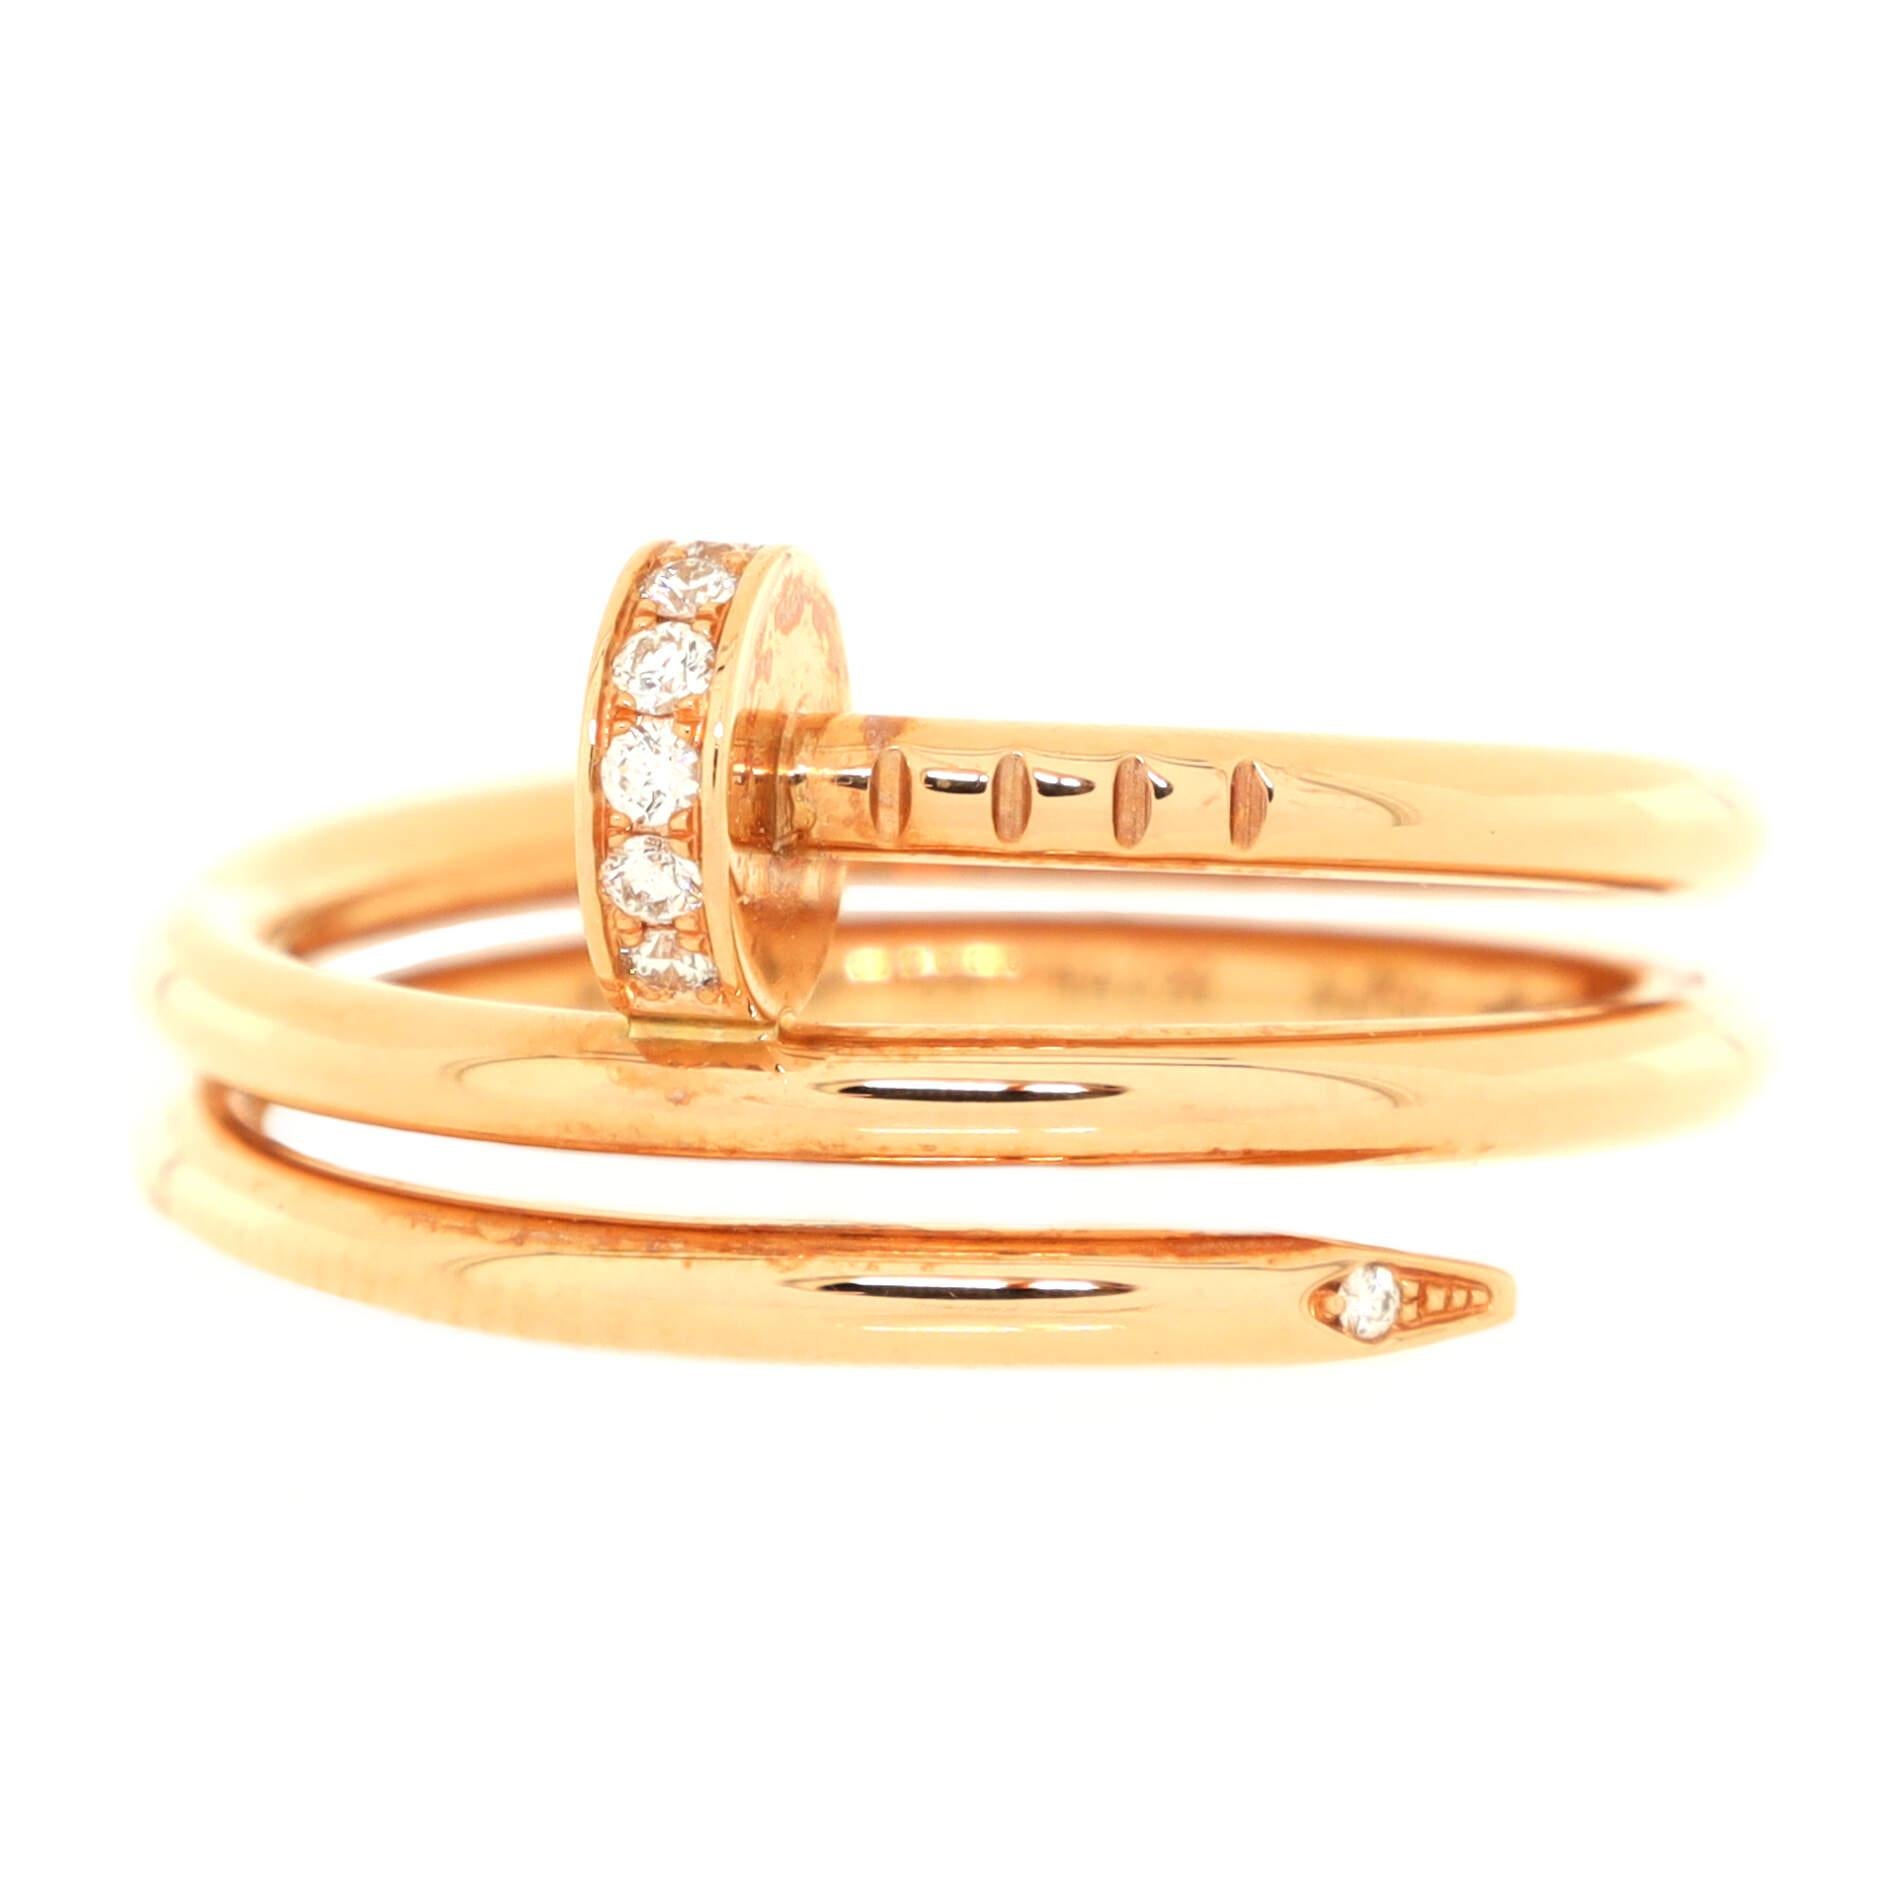 Condition: Great. Minor wear throughout.
Accessories: No Accessories
Measurements: Size: 6.25 - 53, Width: 1.8 mm
Designer: Cartier
Model: Juste un Clou Double Ring 18K Rose Gold and Diamonds Small
Exterior Color: Rose Gold
Item Number: 215480/58